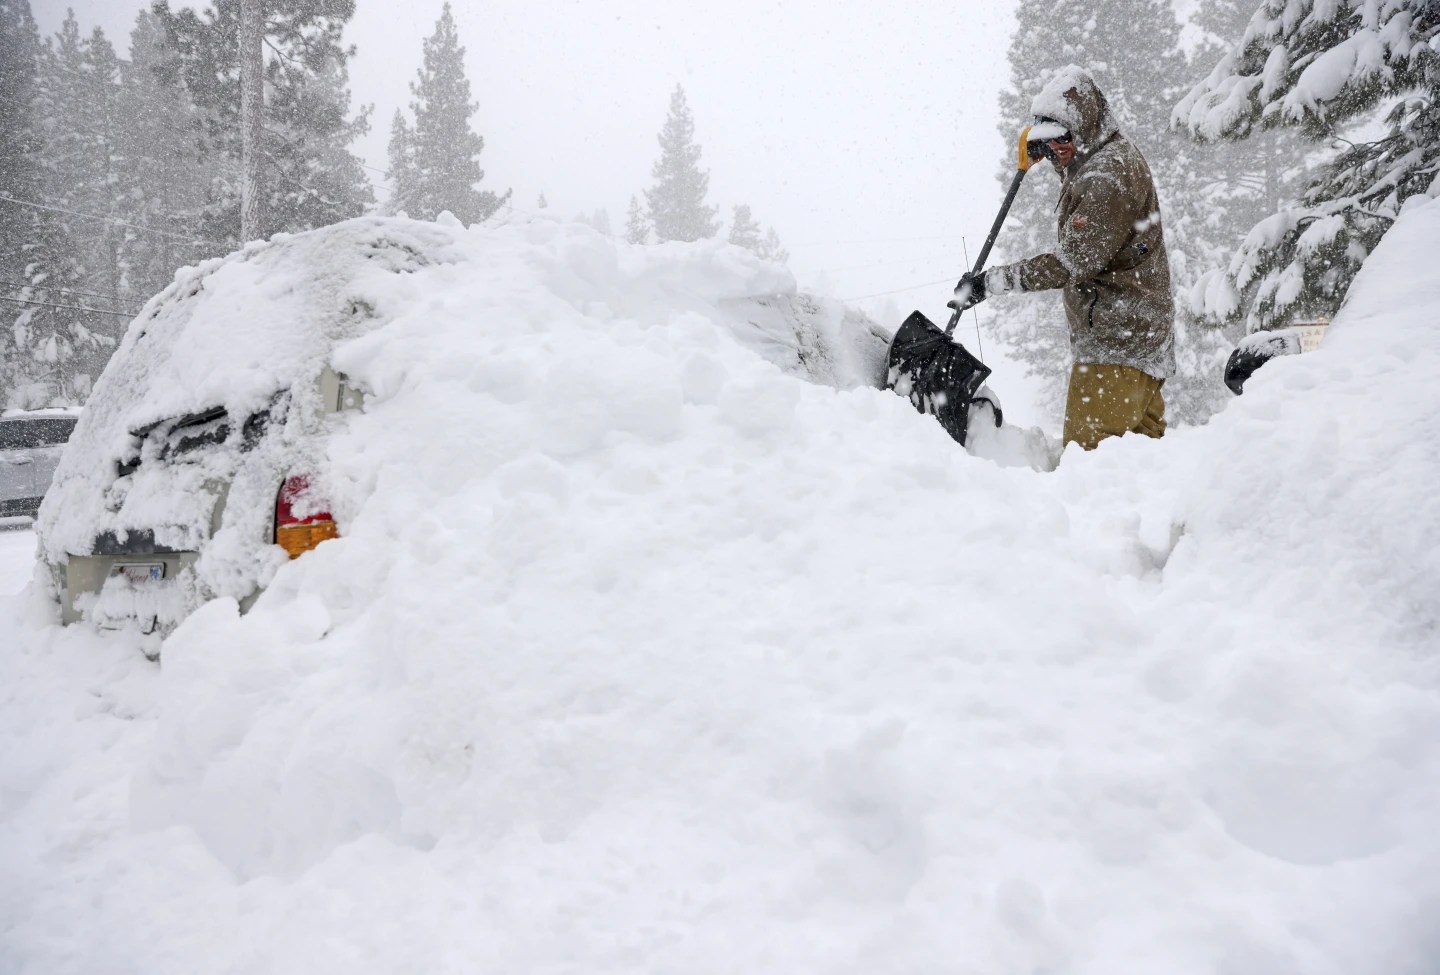 A person in winter gear shovels heavy snow engulfing a vehicle amidst a snowfall.